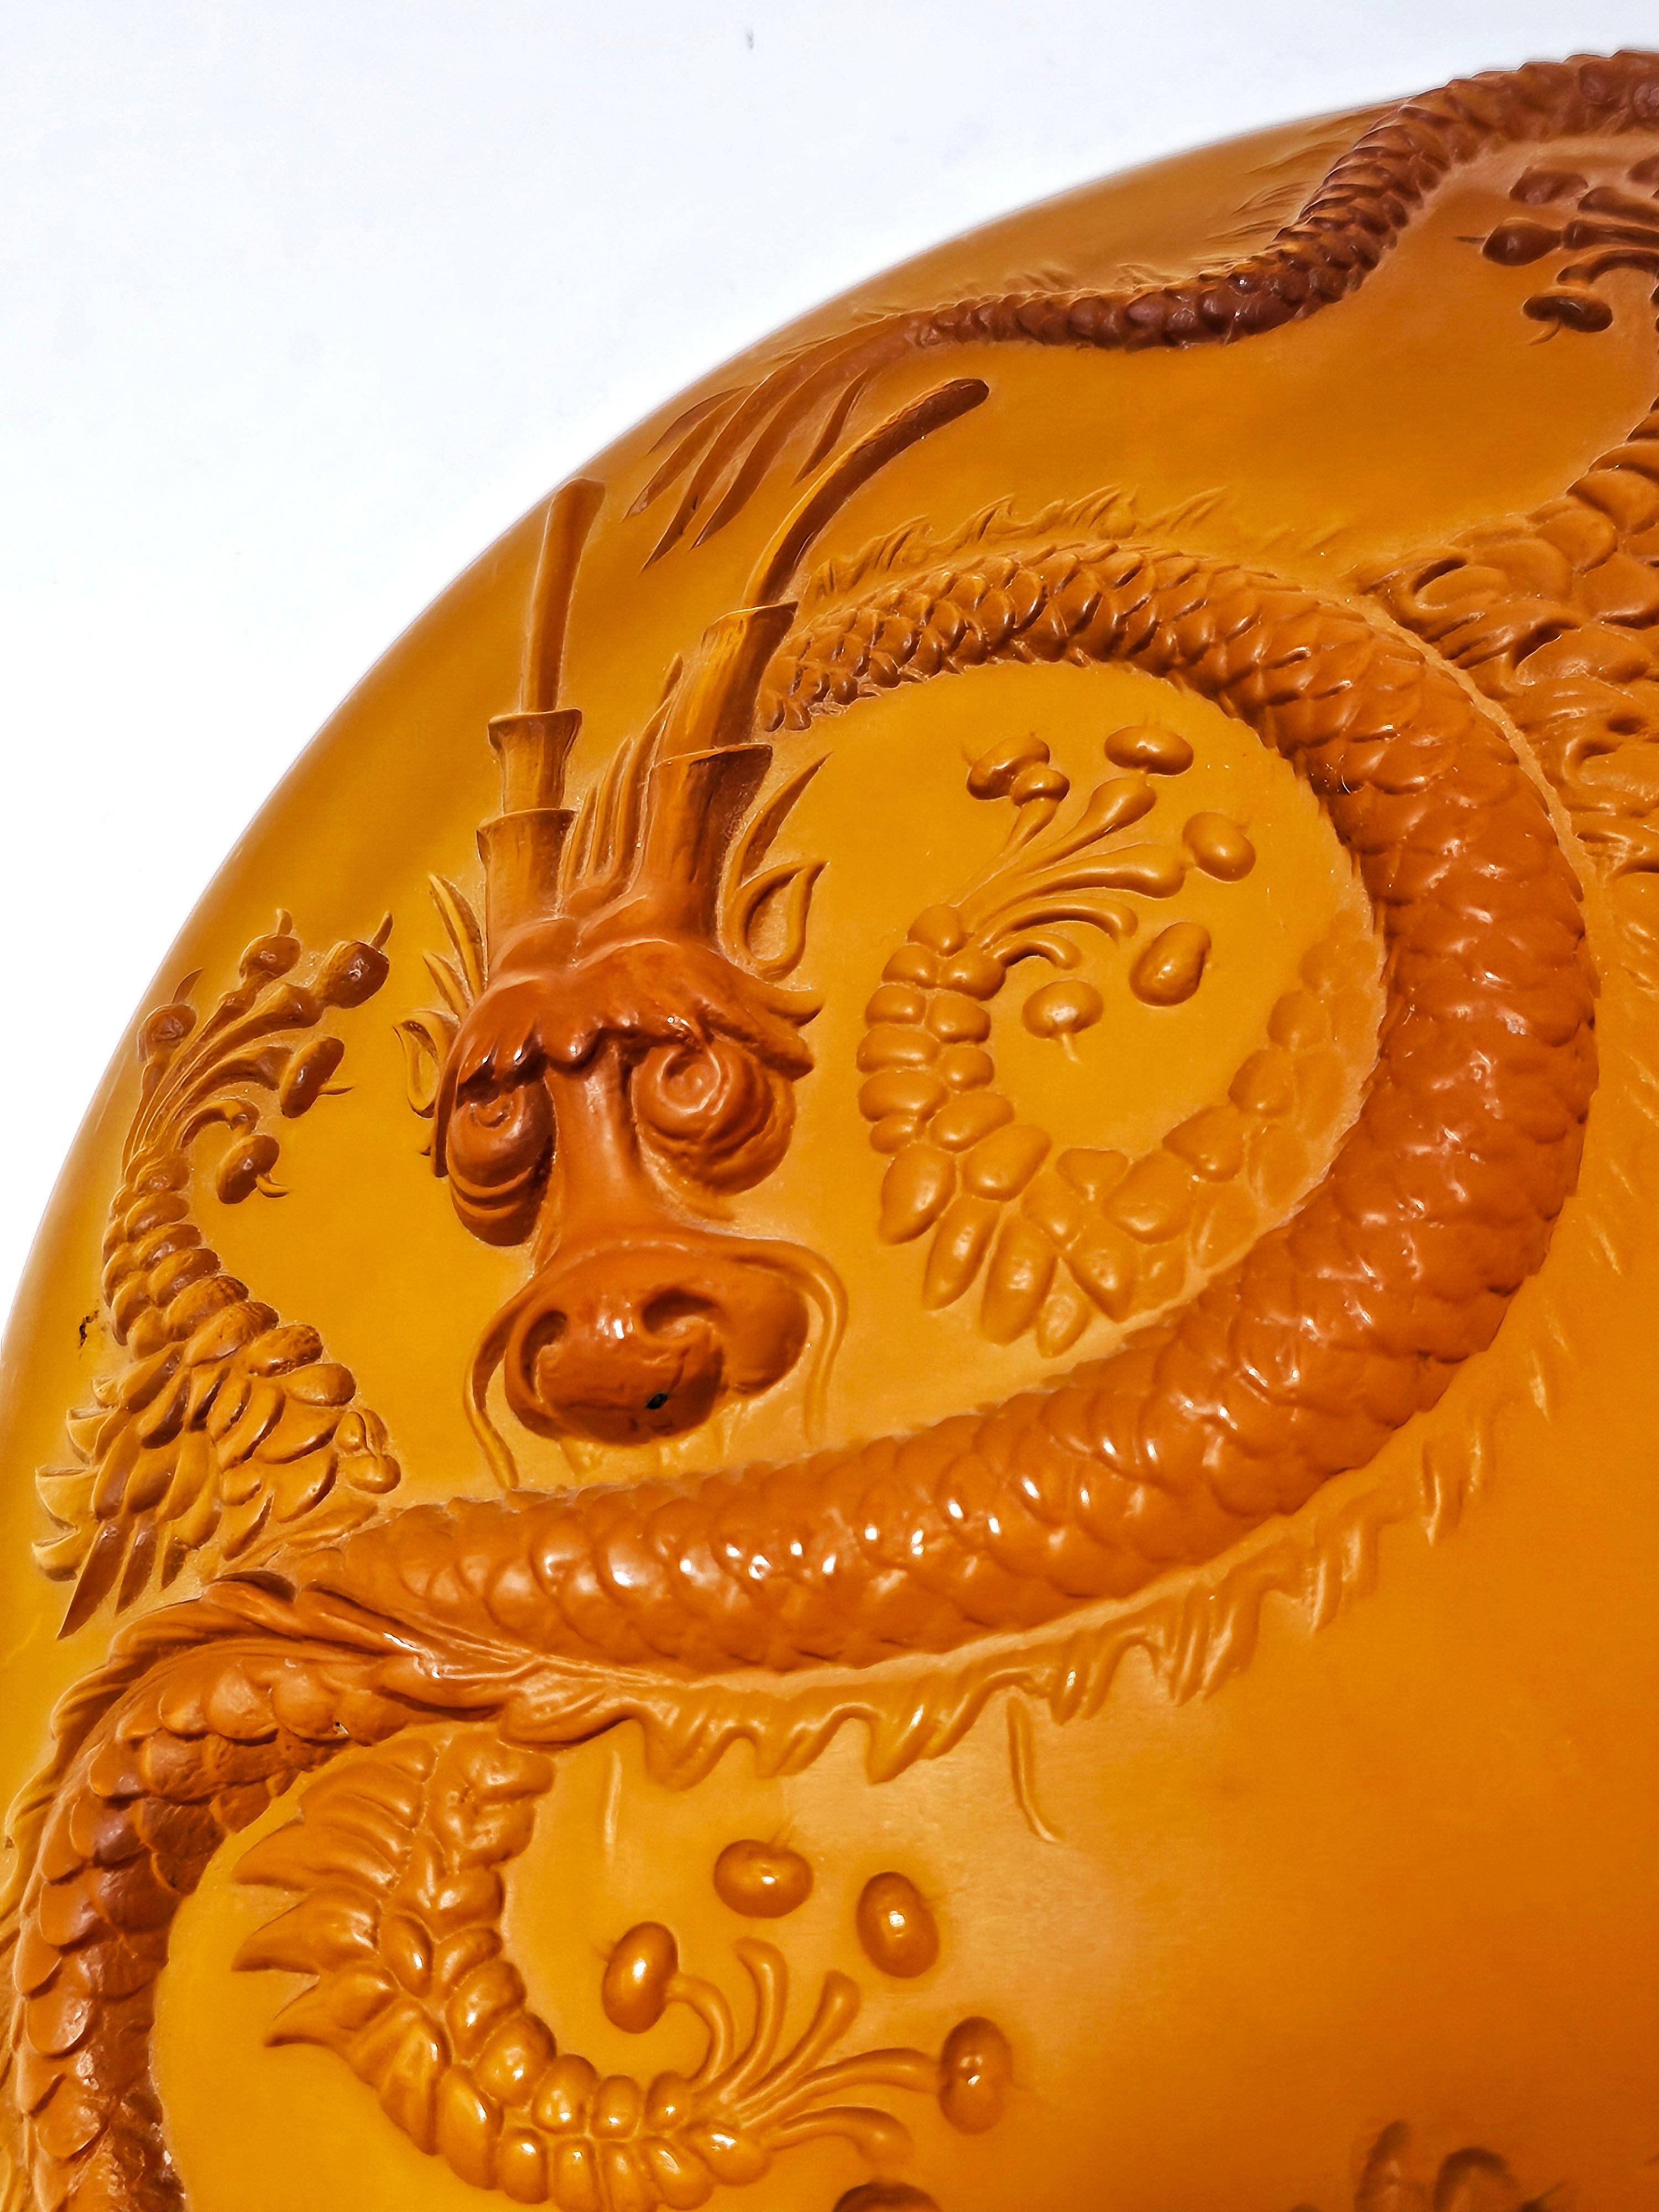 In this listing you will find a breathtaking Art Deco bowl or large serving plate with 3D Oriental style dragons motif that look they are reaching out of the glass. This beautiful amber glass piece was designed by Josef Inwald for Barolac glass